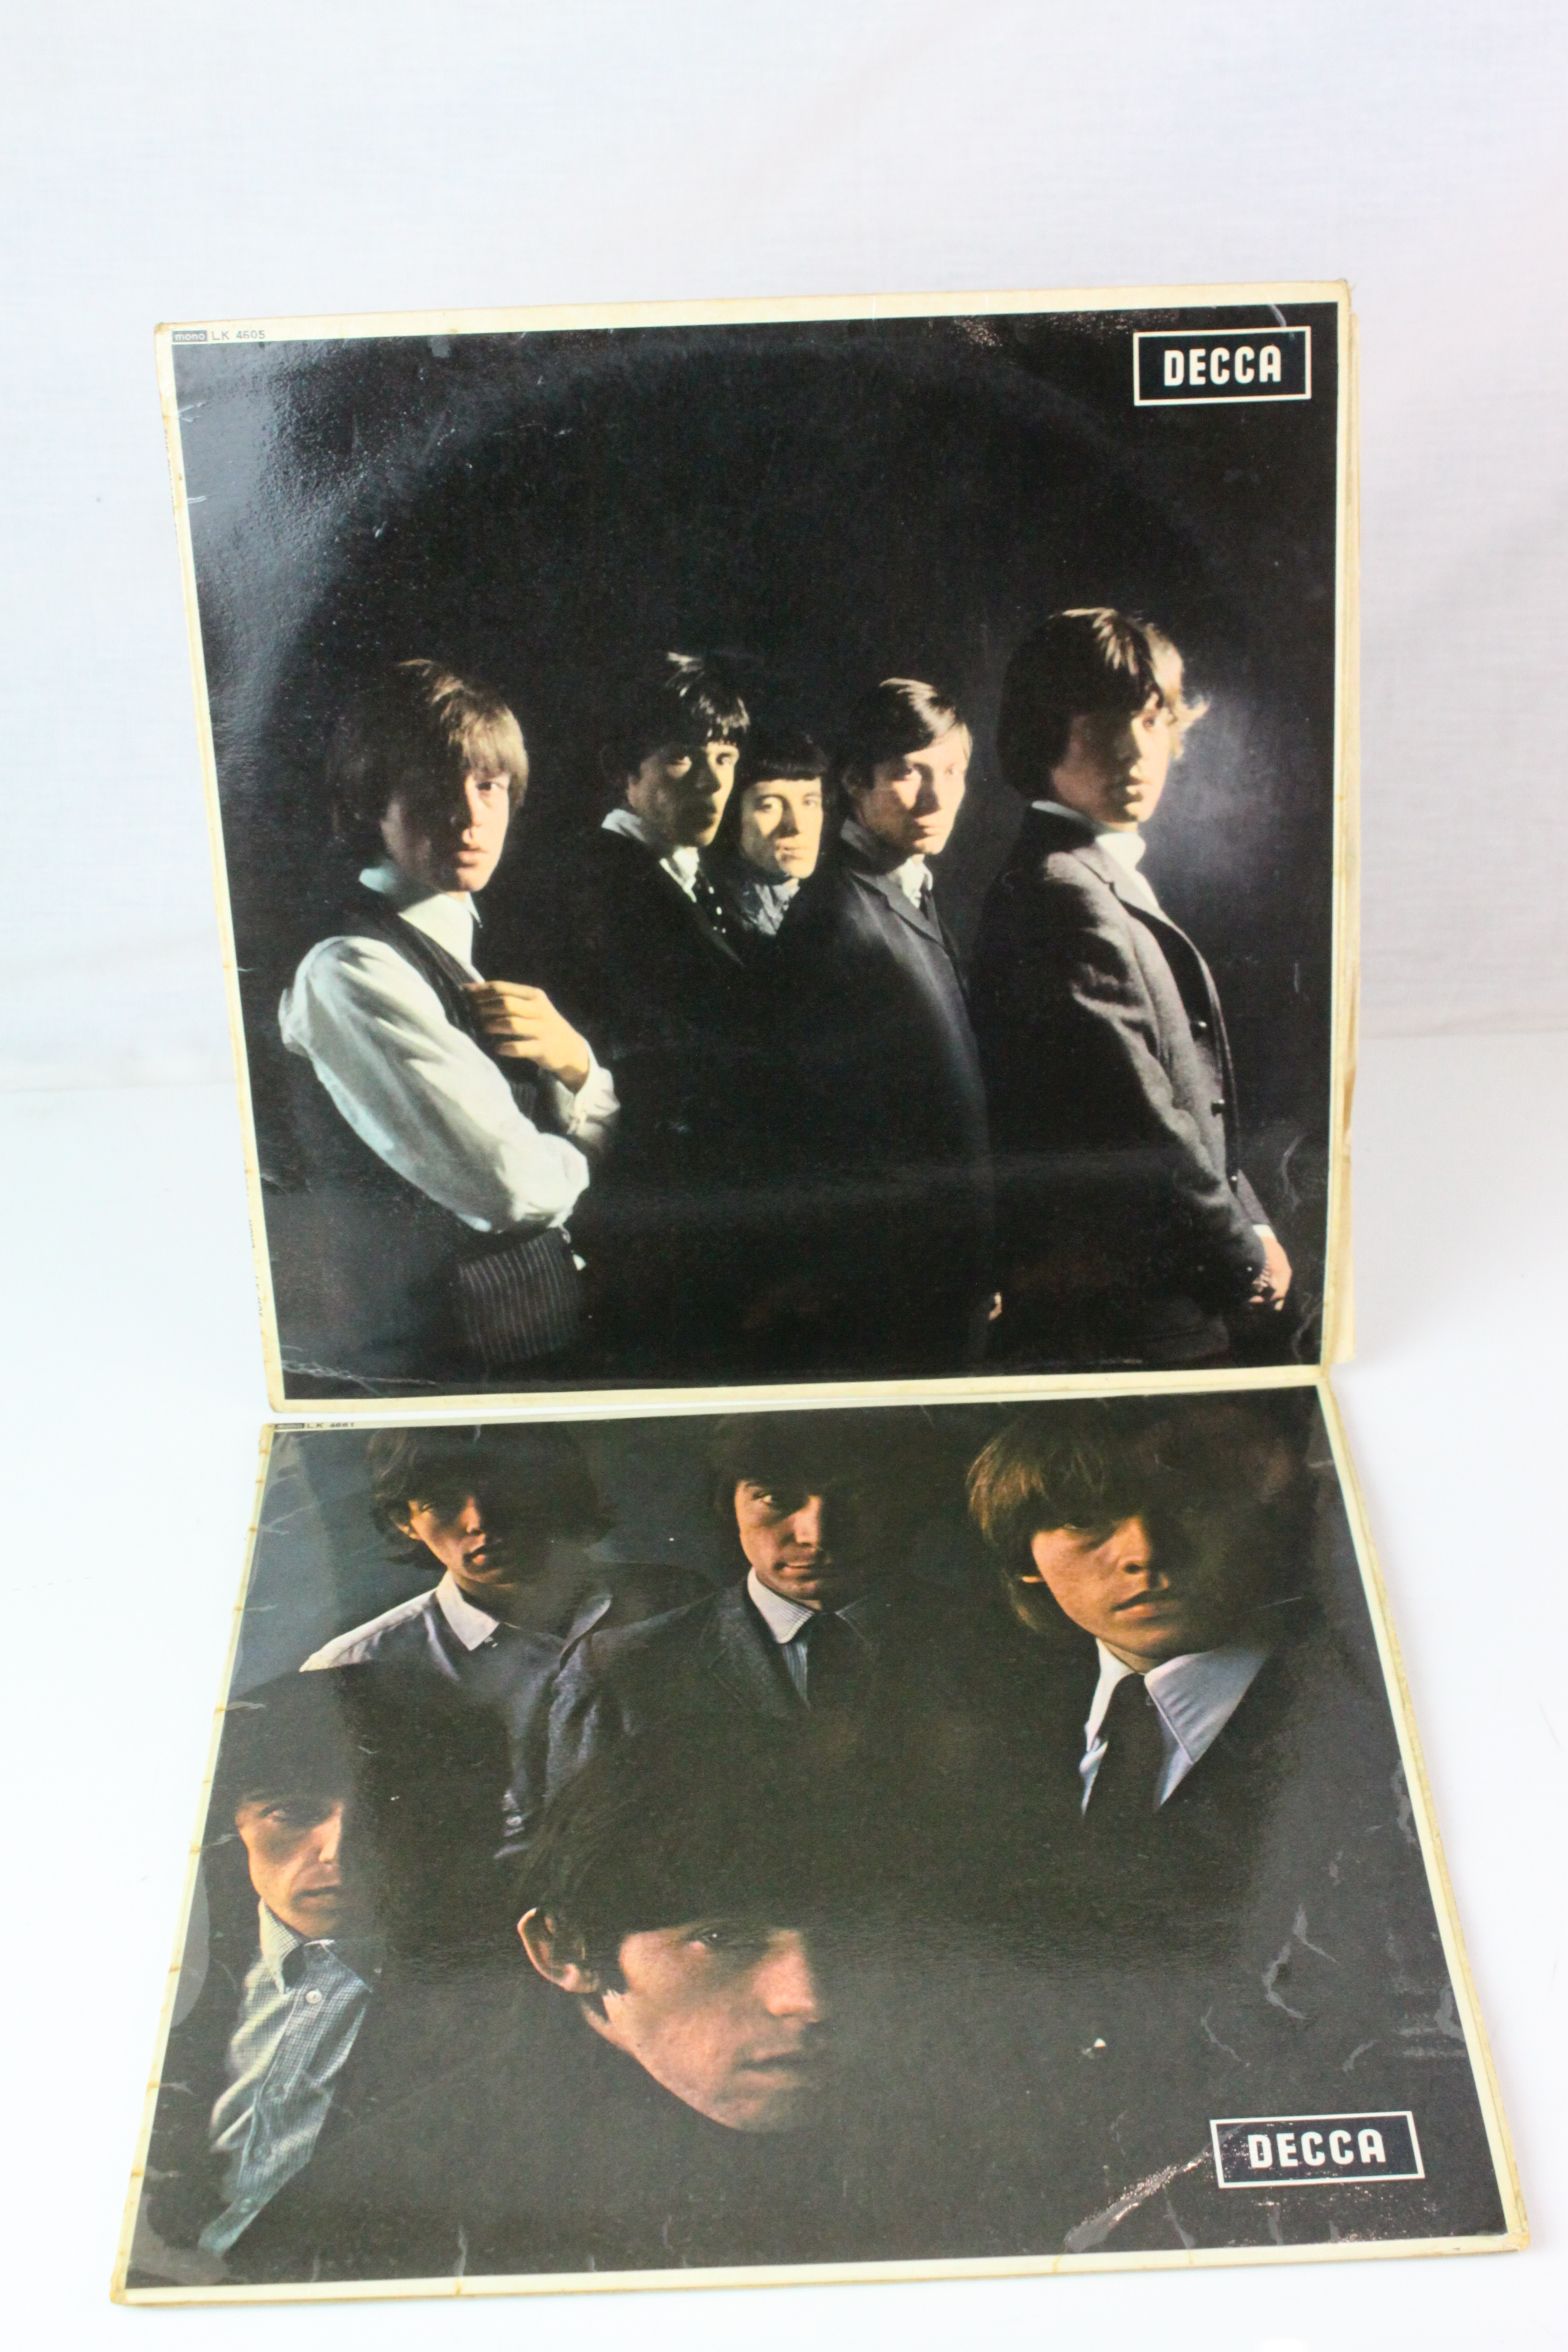 Vinyl - Two The Rolling Stones LPs to include no 1 on Decca LK4605 mono and no 2 LK4661 mono,